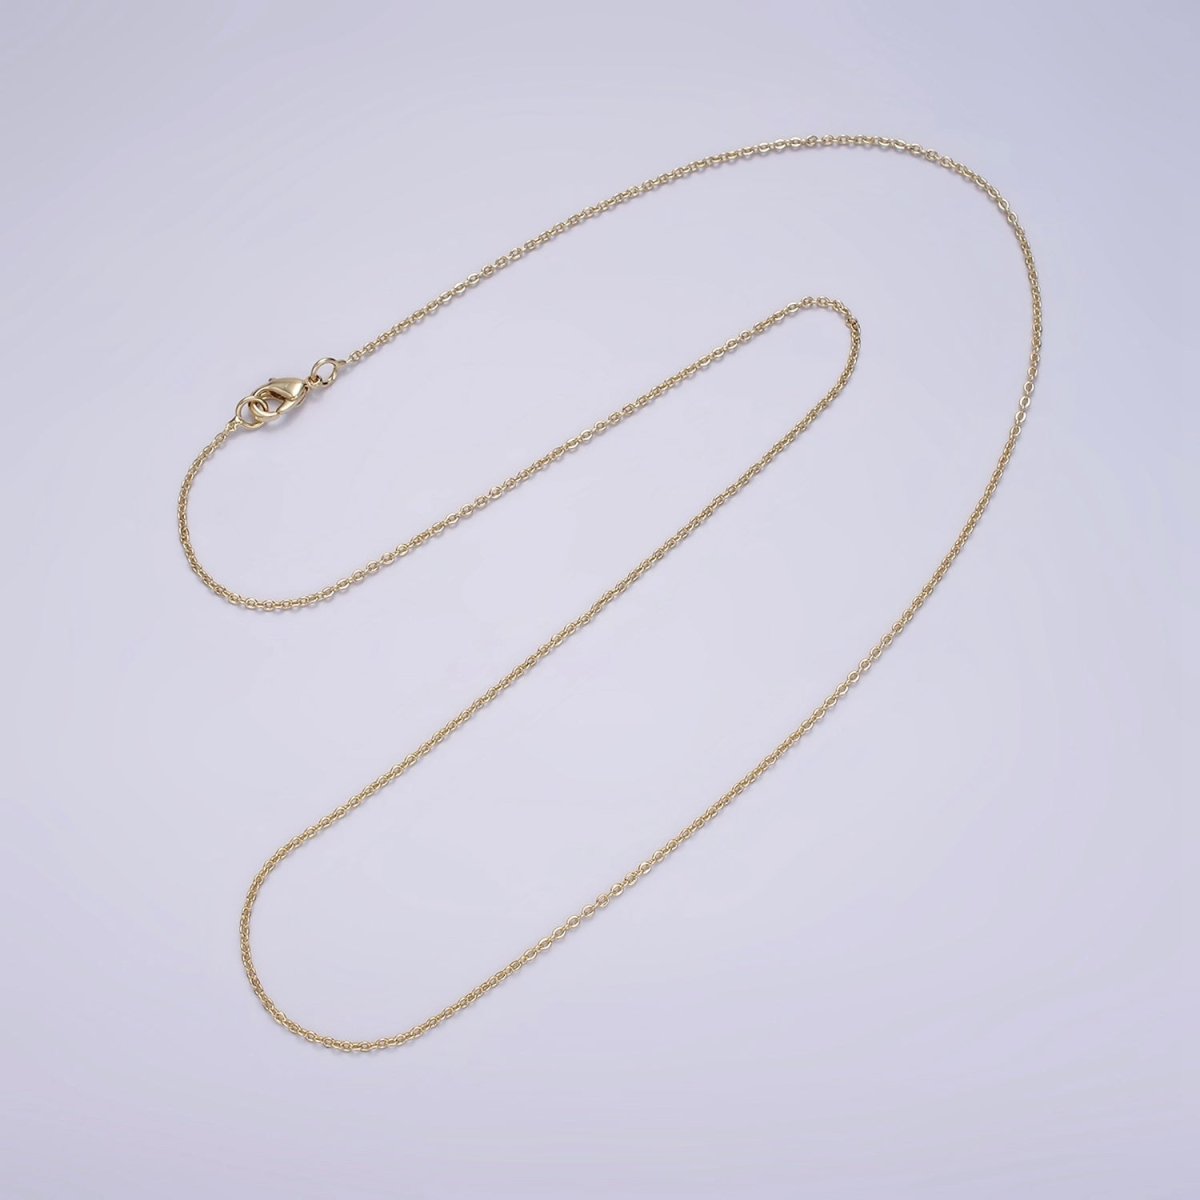 14K Gold Filled 1.2mm Dainty Cable Chain 18 Inch, 16 Inch, 20 Inch Layering Chain Necklace | WA-2117 - WA-2119 - DLUXCA